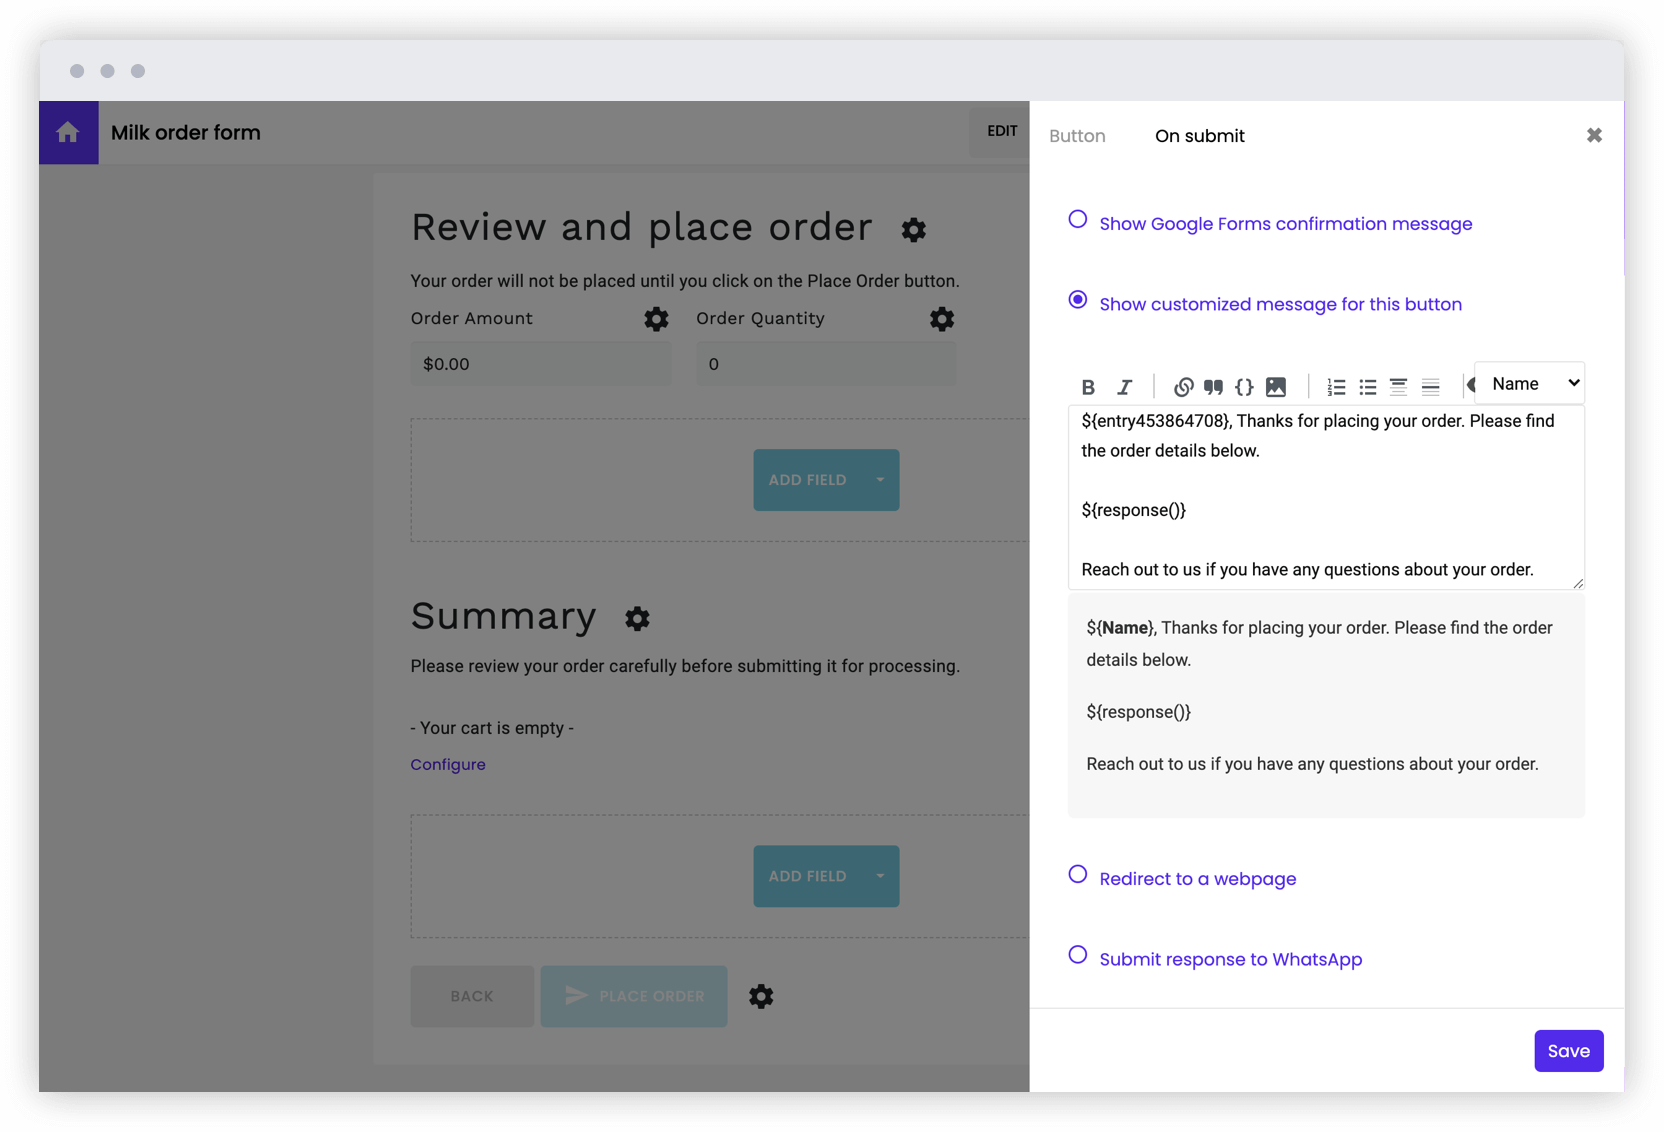 Personalize the thank you message or redirect users to another page when they submit their order